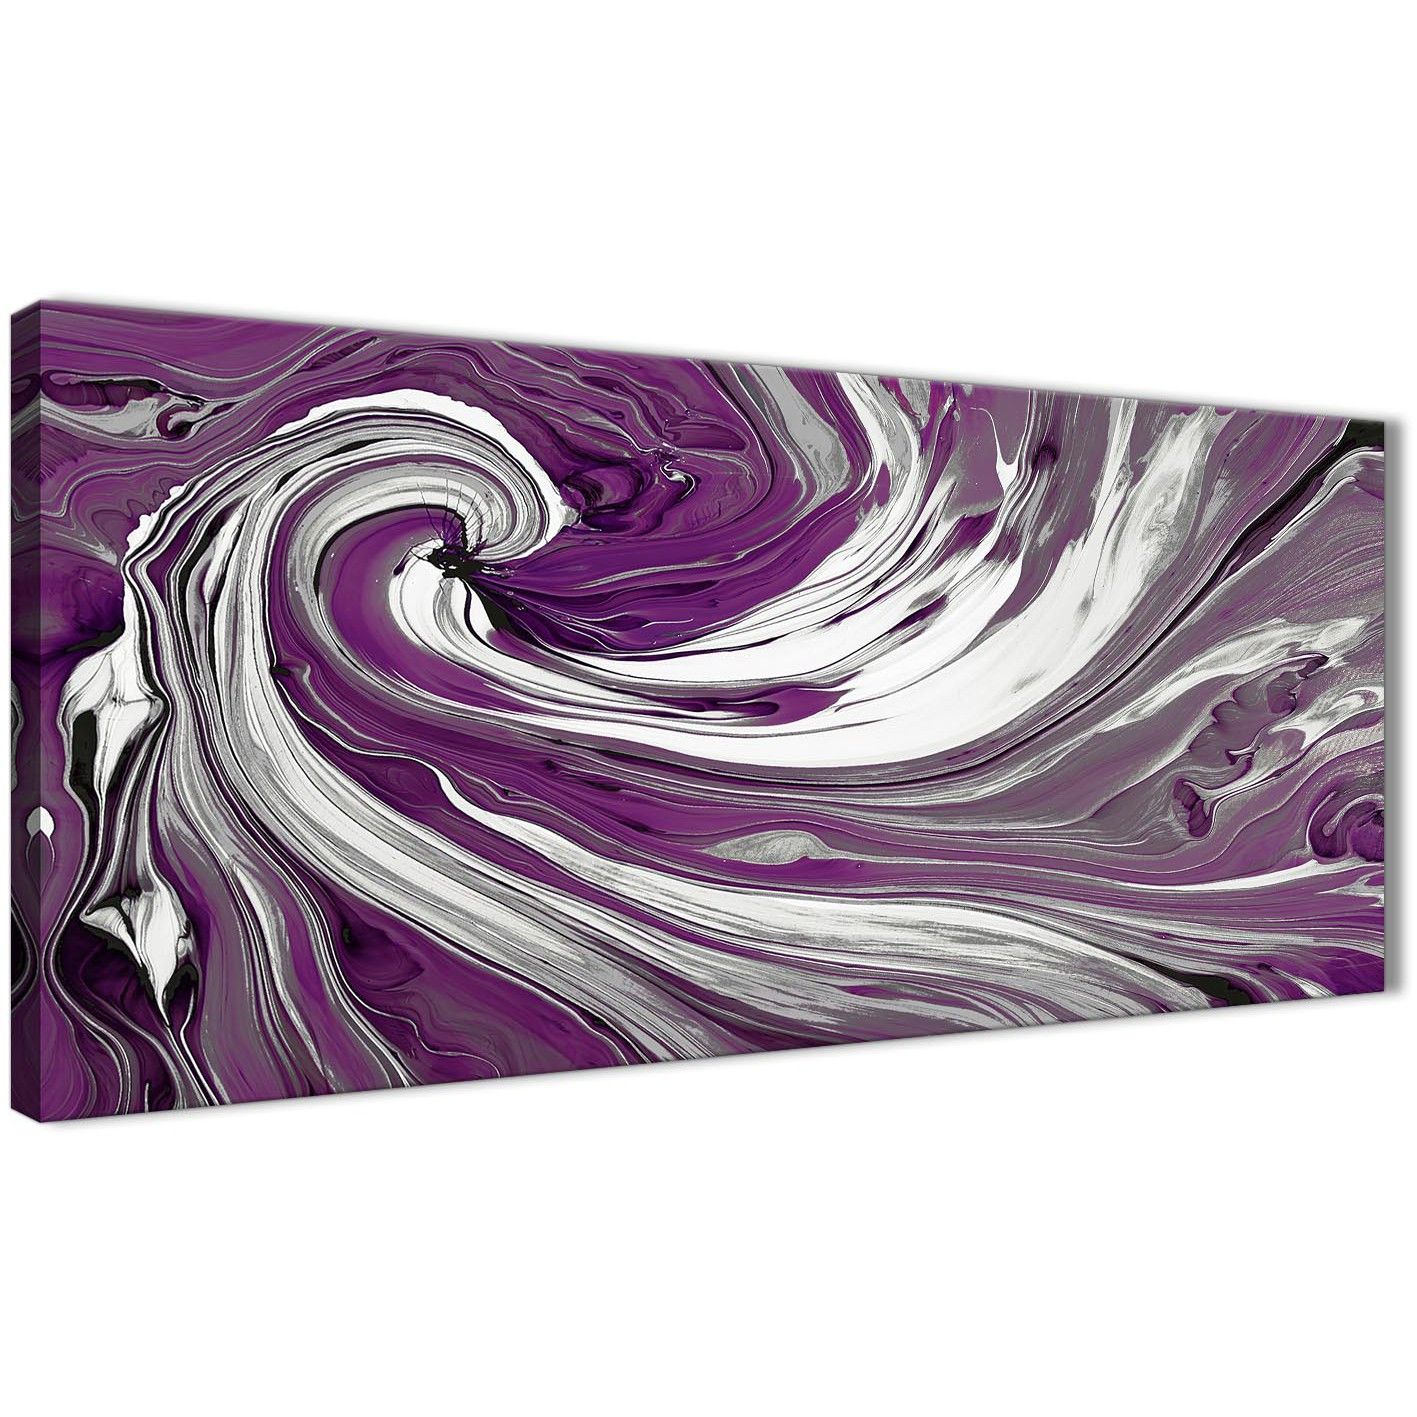 Purple White Swirls Modern Abstract Canvas Wall Art With Regard To Best And Newest Swirl Wall Art (View 6 of 20)